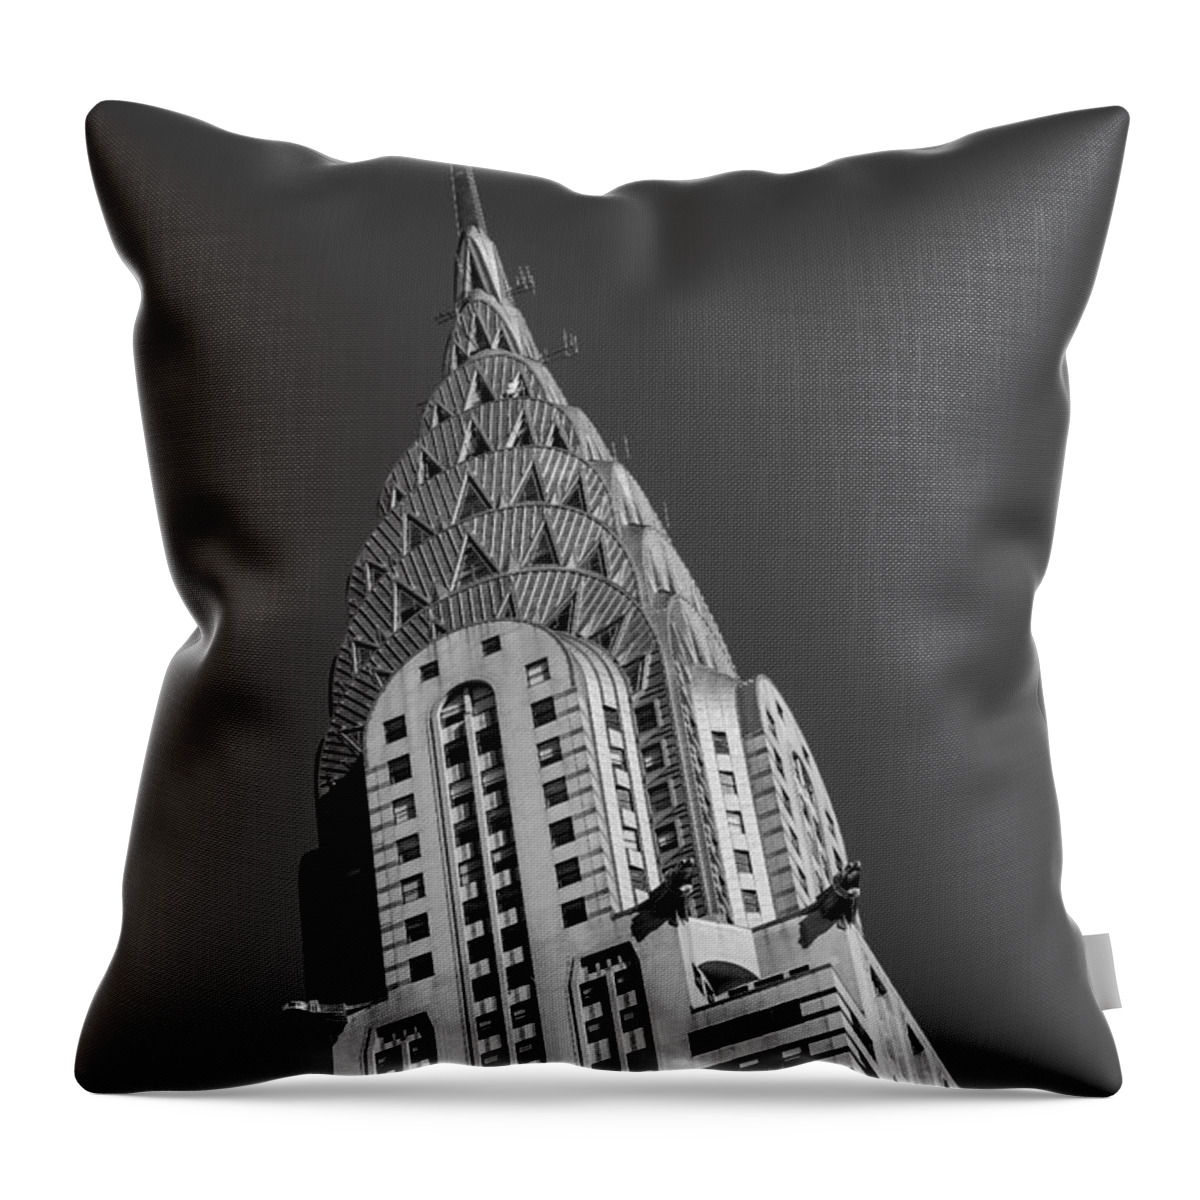 Chrysler Building Throw Pillow featuring the photograph Chrysler Building BW by Susan Candelario